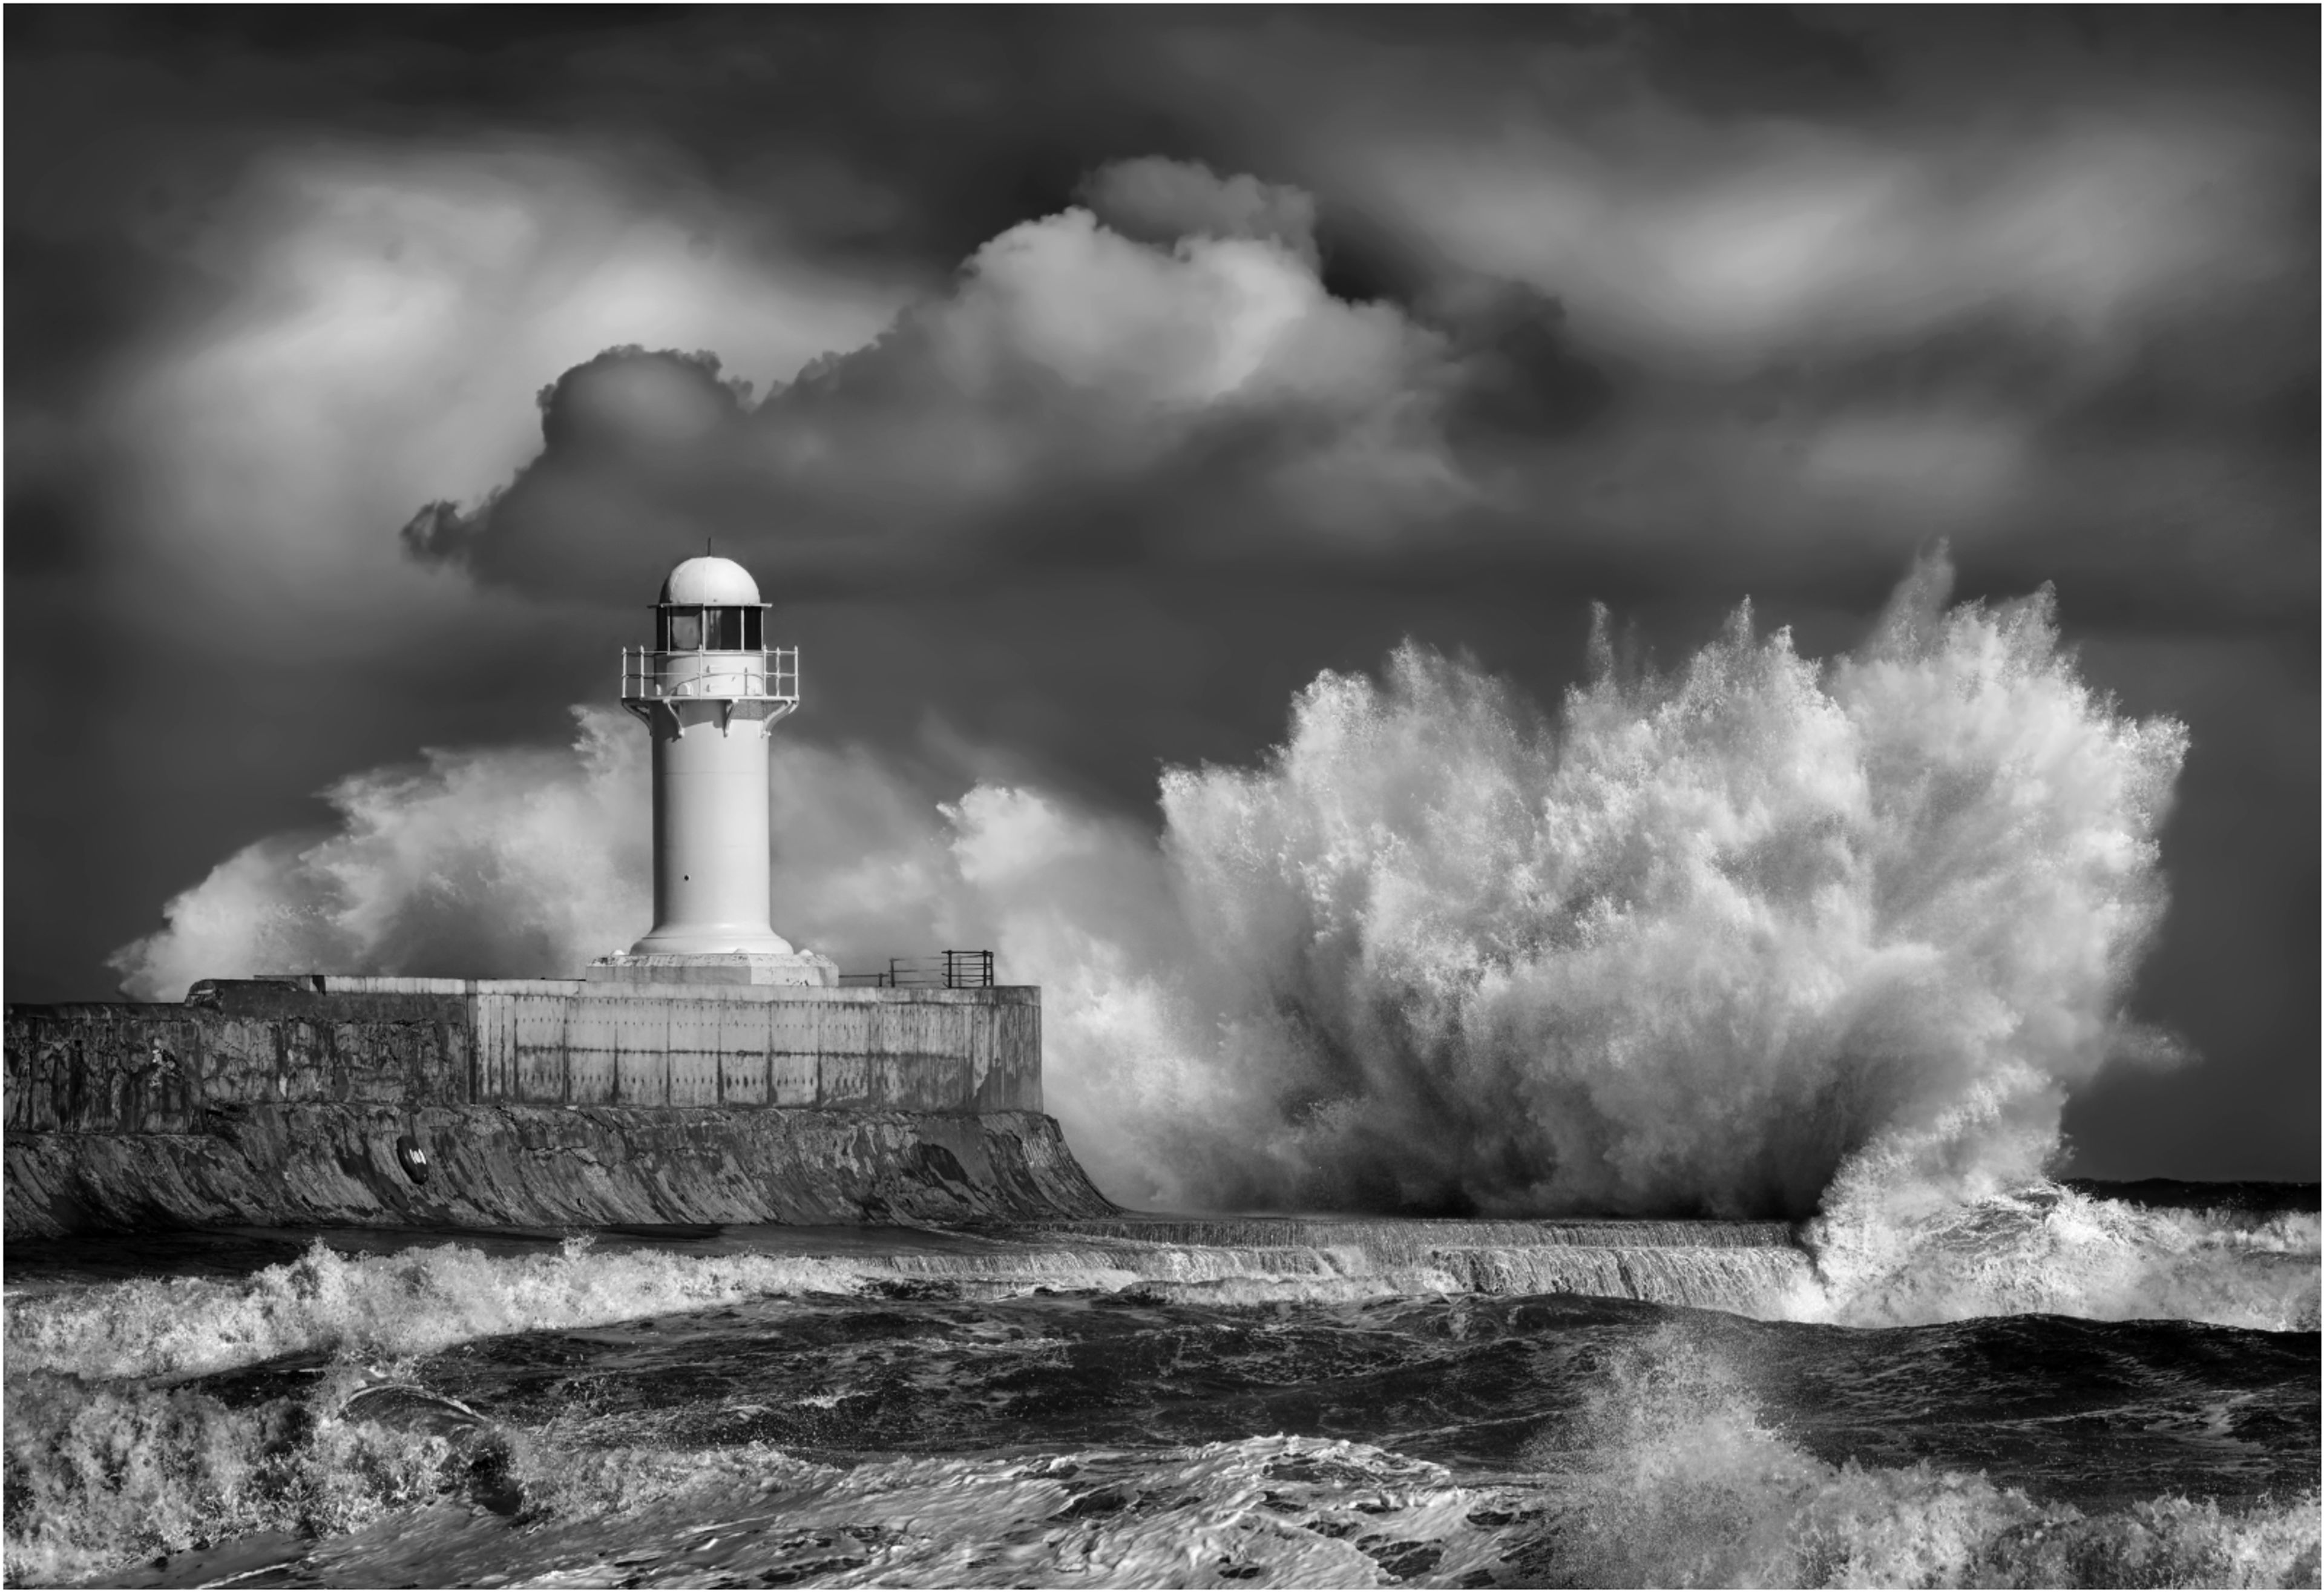 South Gare by Steve Gray